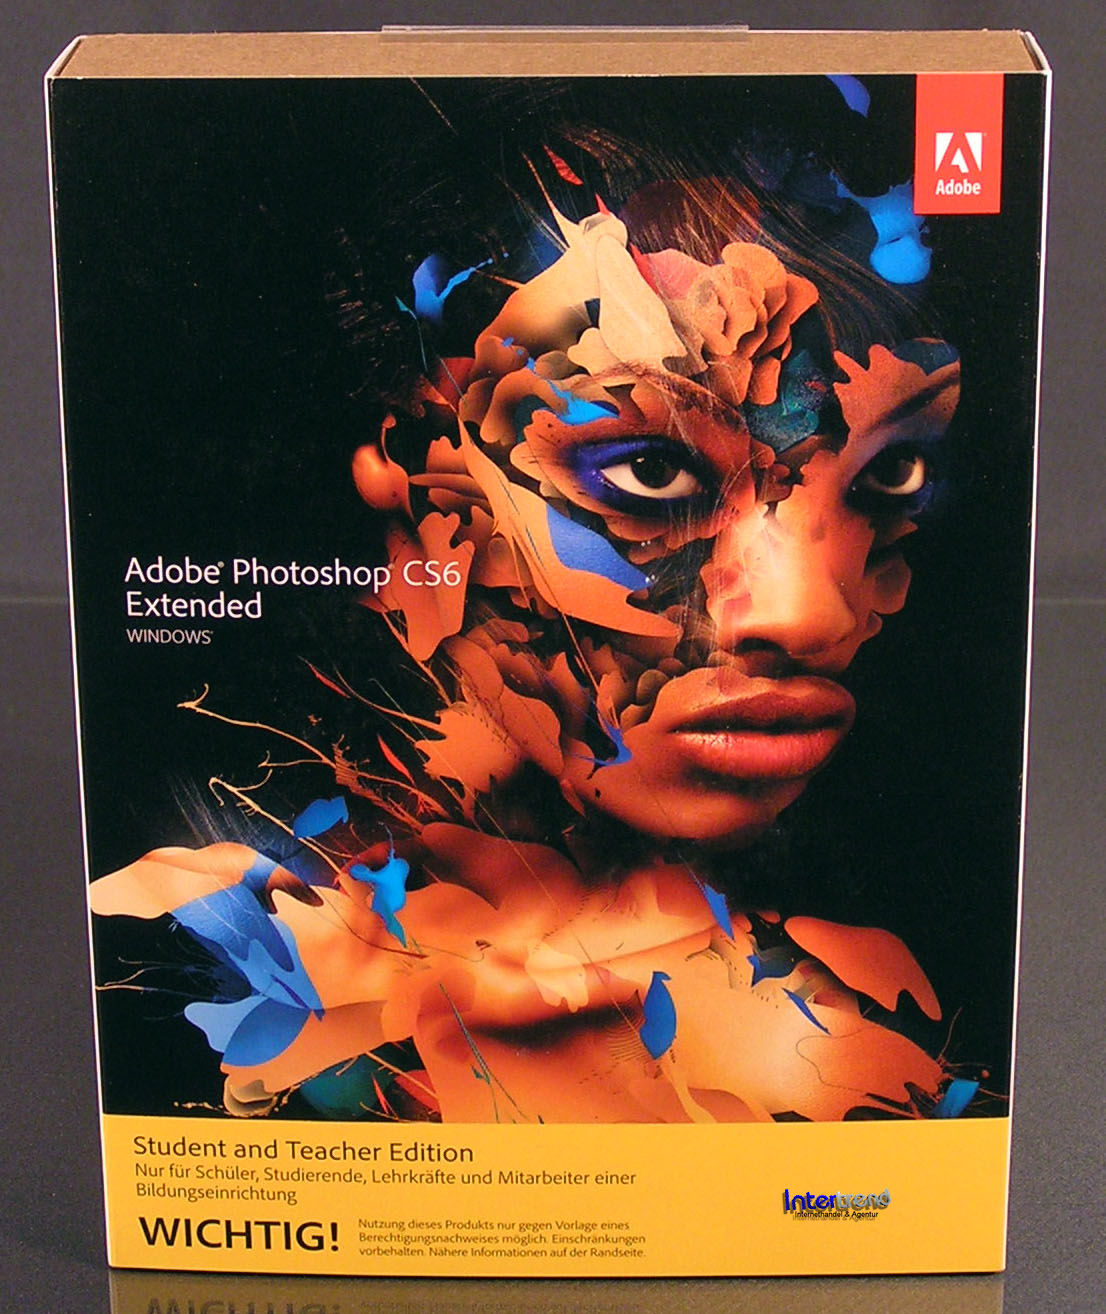 adobe photoshop extended cs6 student and teacher edition download